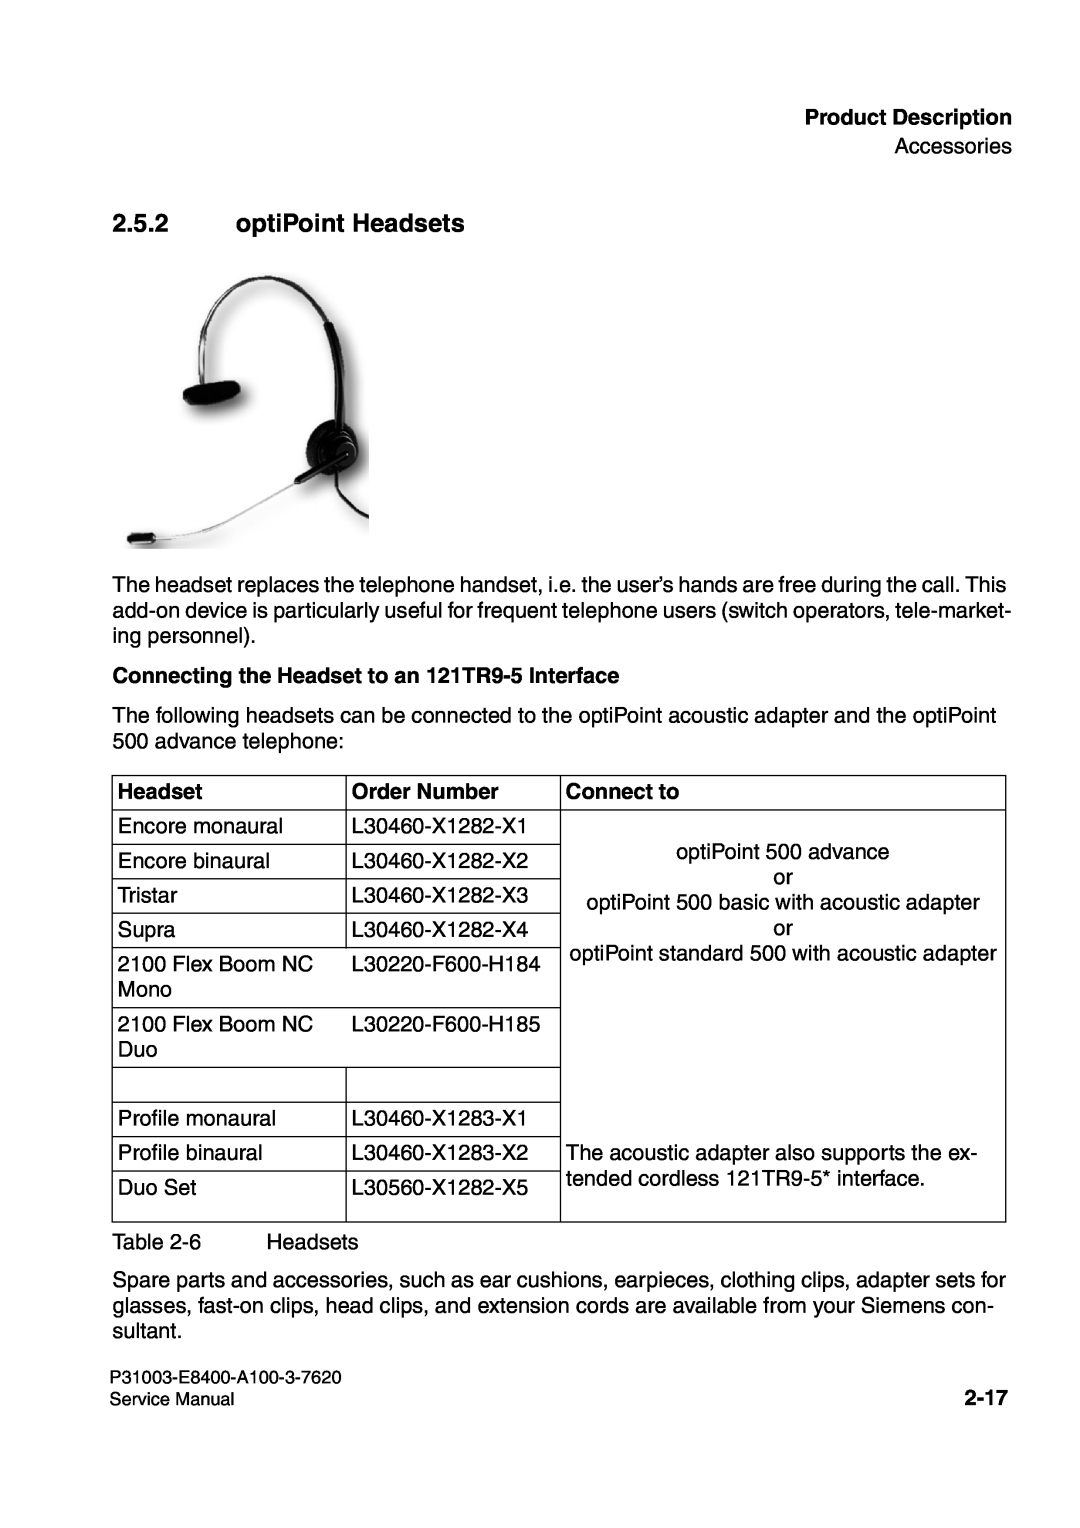 Siemens 500 optiPoint Headsets, Product Description, Connecting the Headset to an 121TR9-5 Interface, Order Number, 2-17 